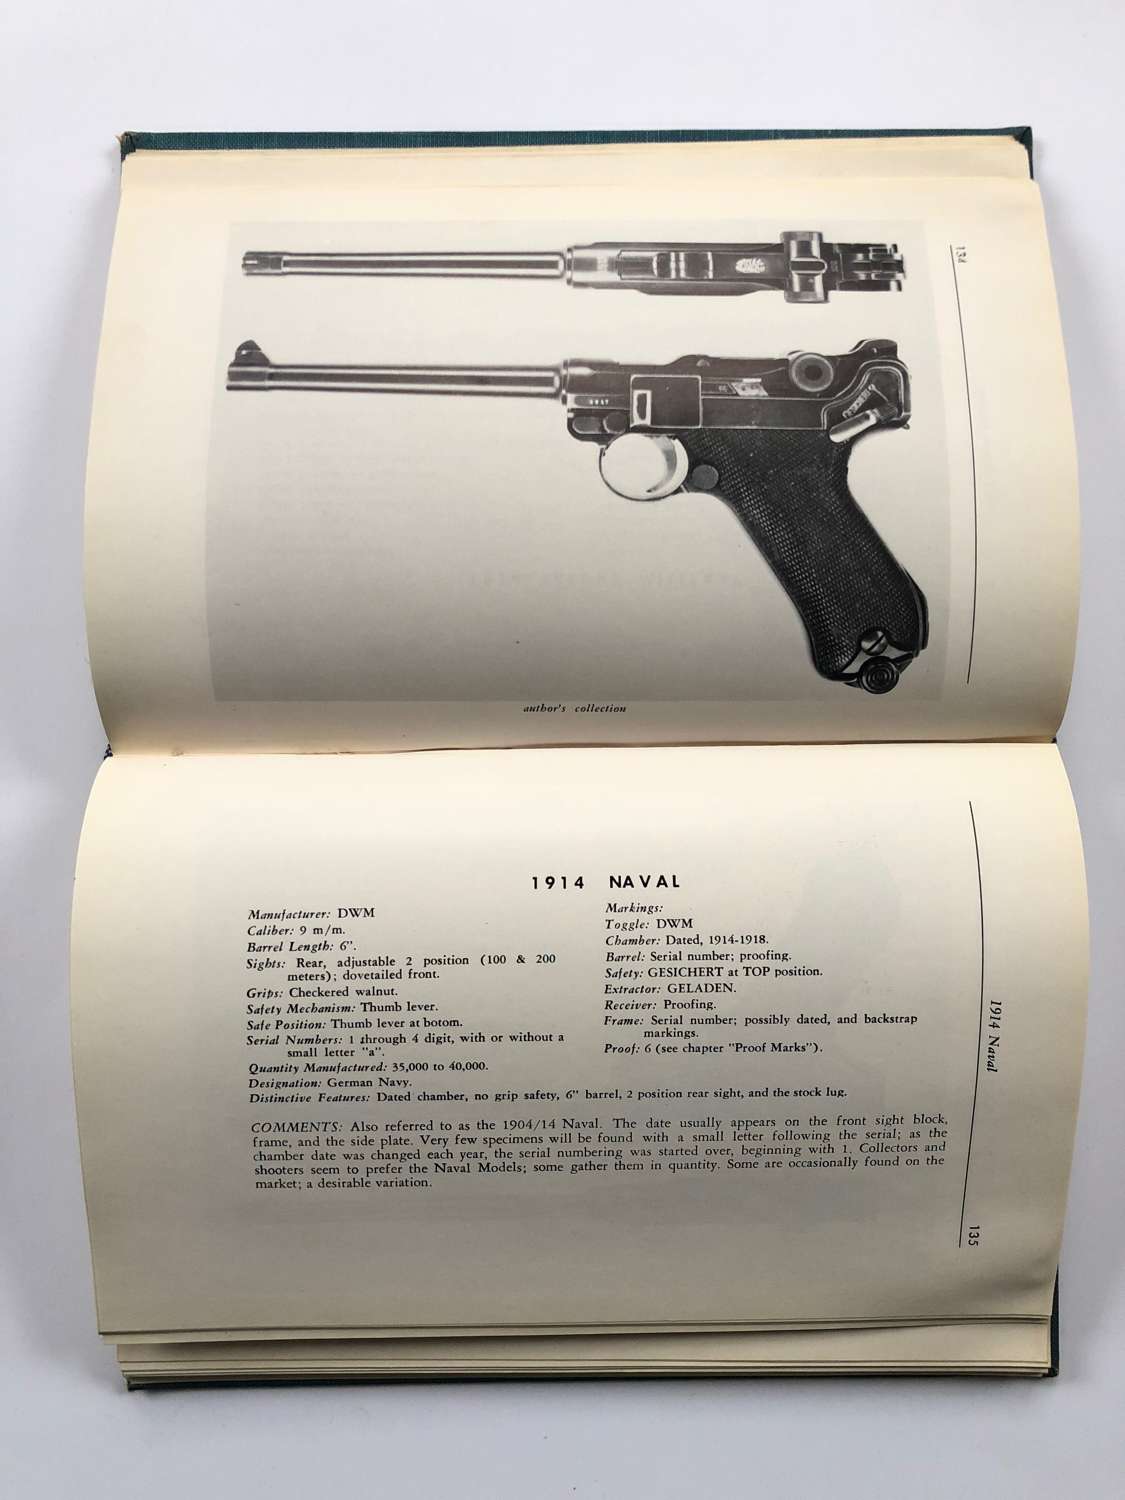 German Luger Variations Reference Book by H.E. Jones.